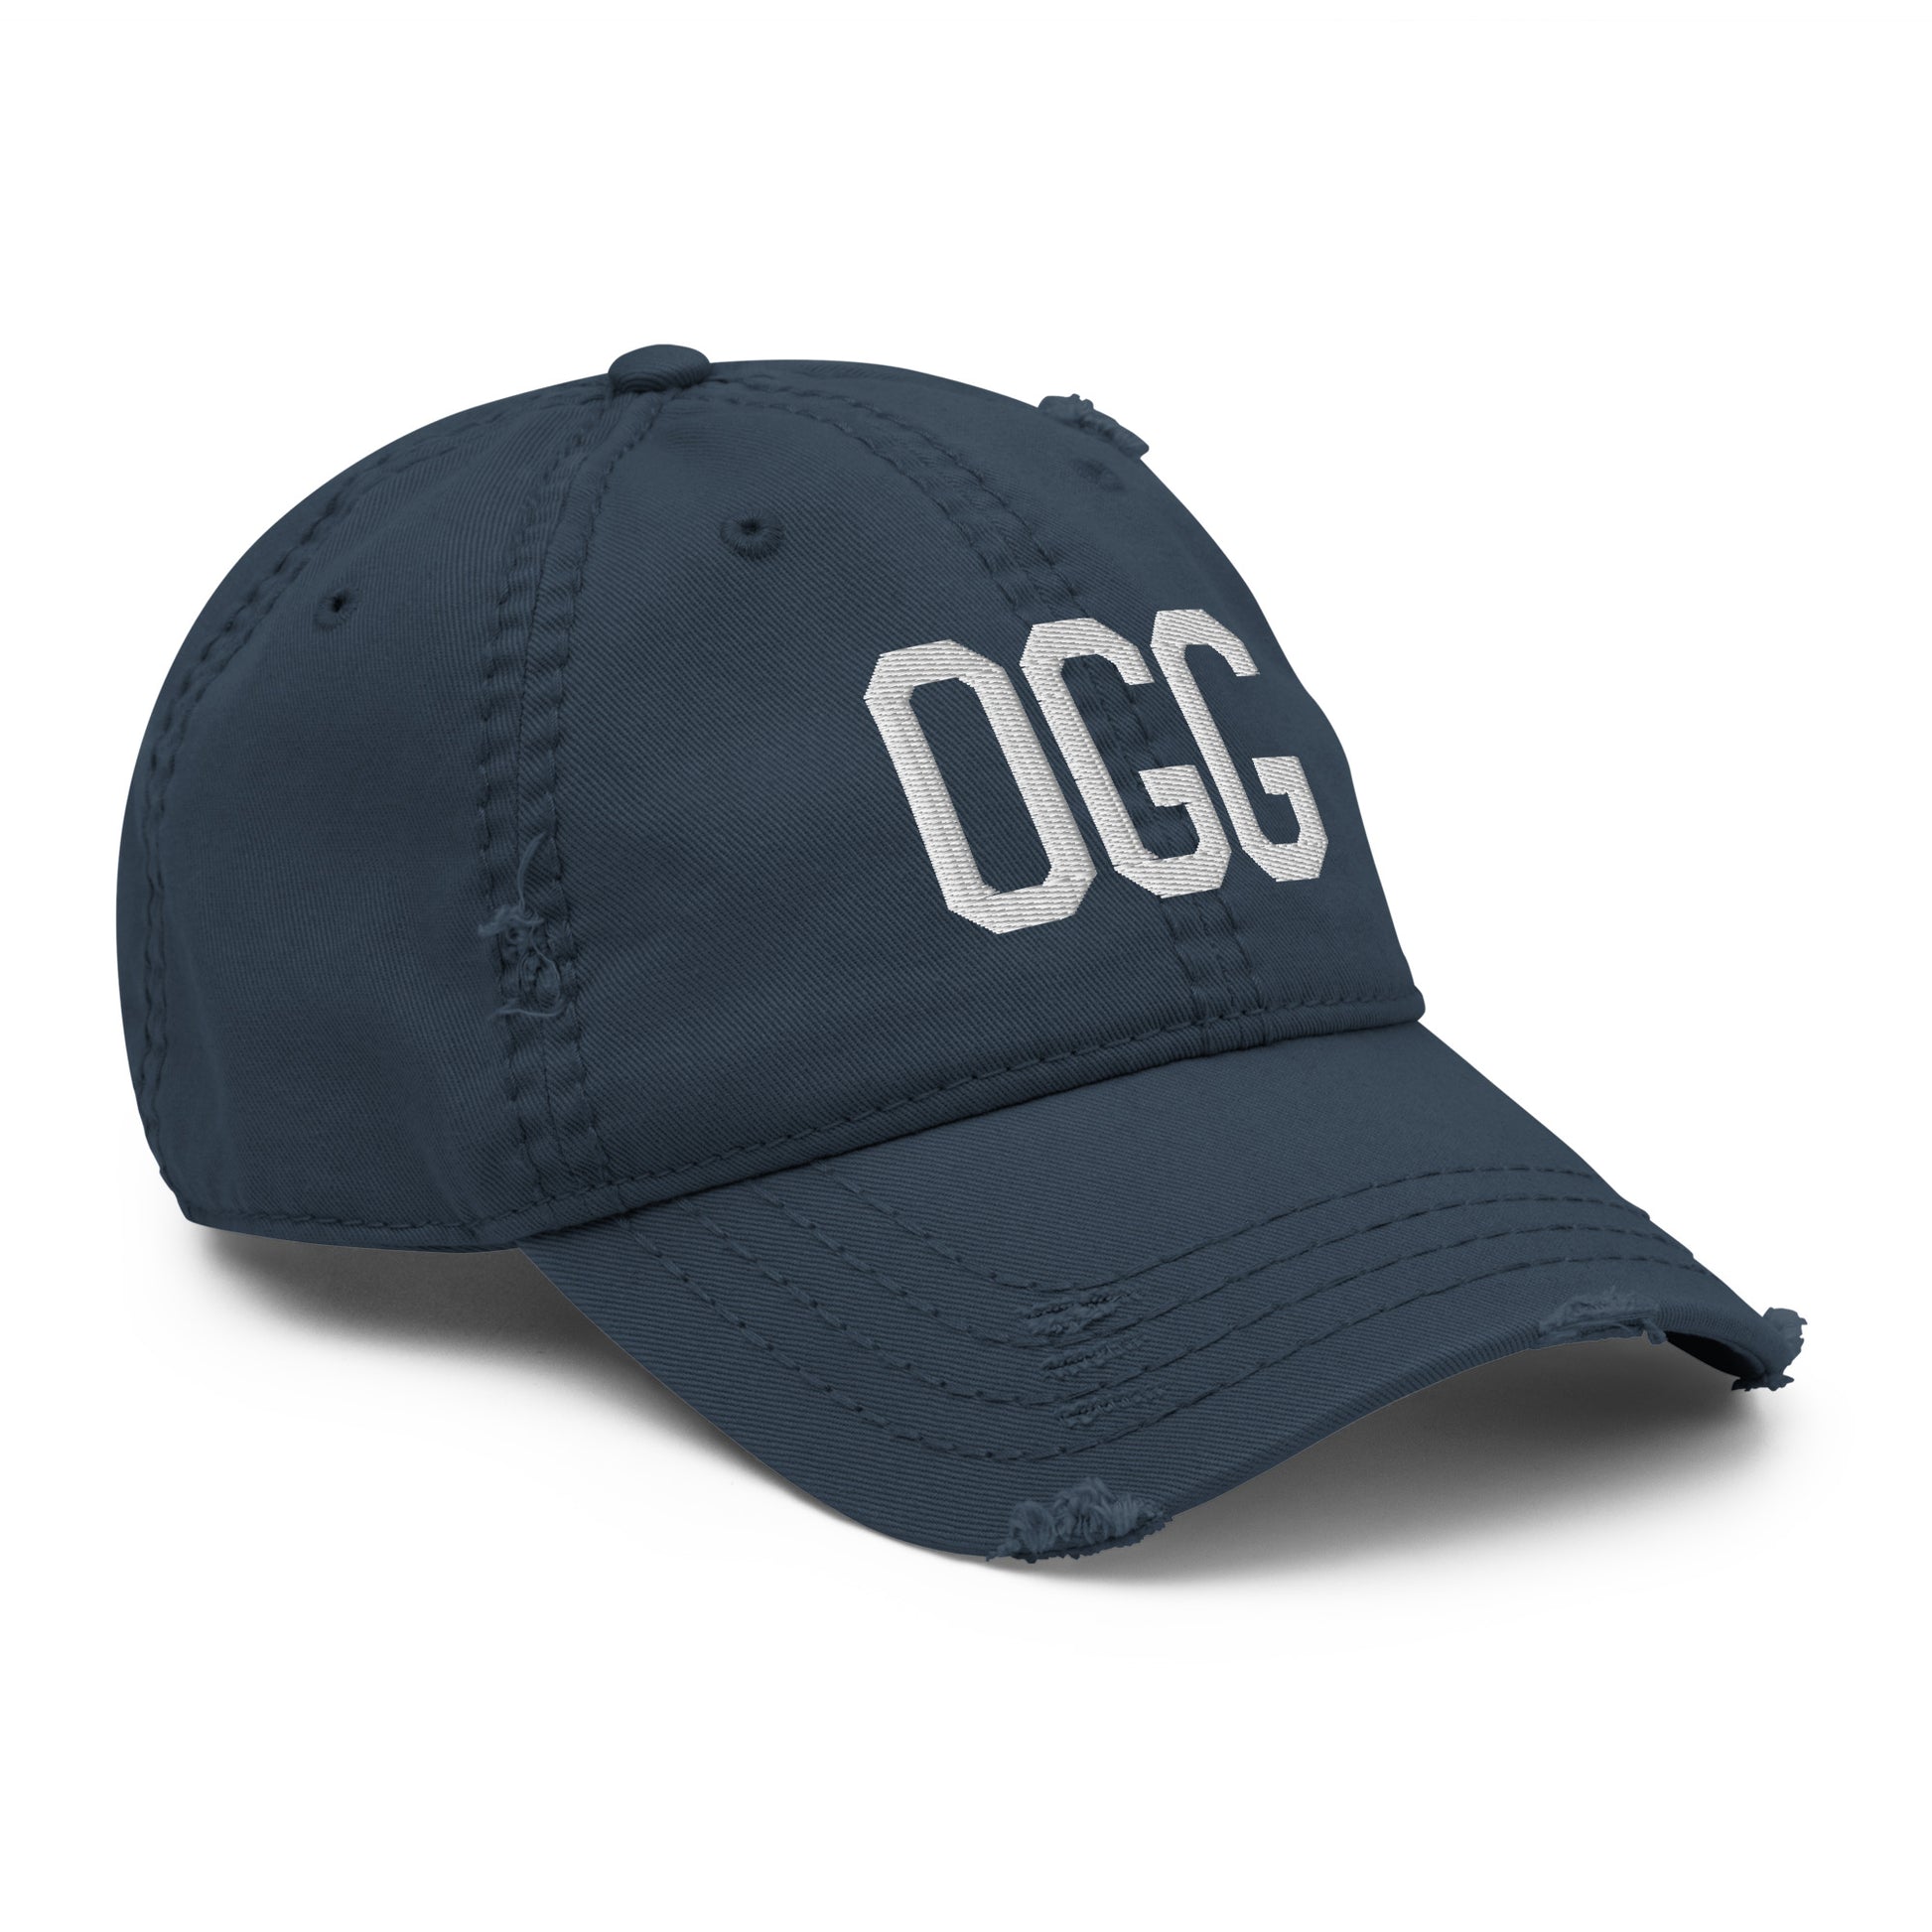 Airport Code Distressed Hat - White • OGG Maui • YHM Designs - Image 14